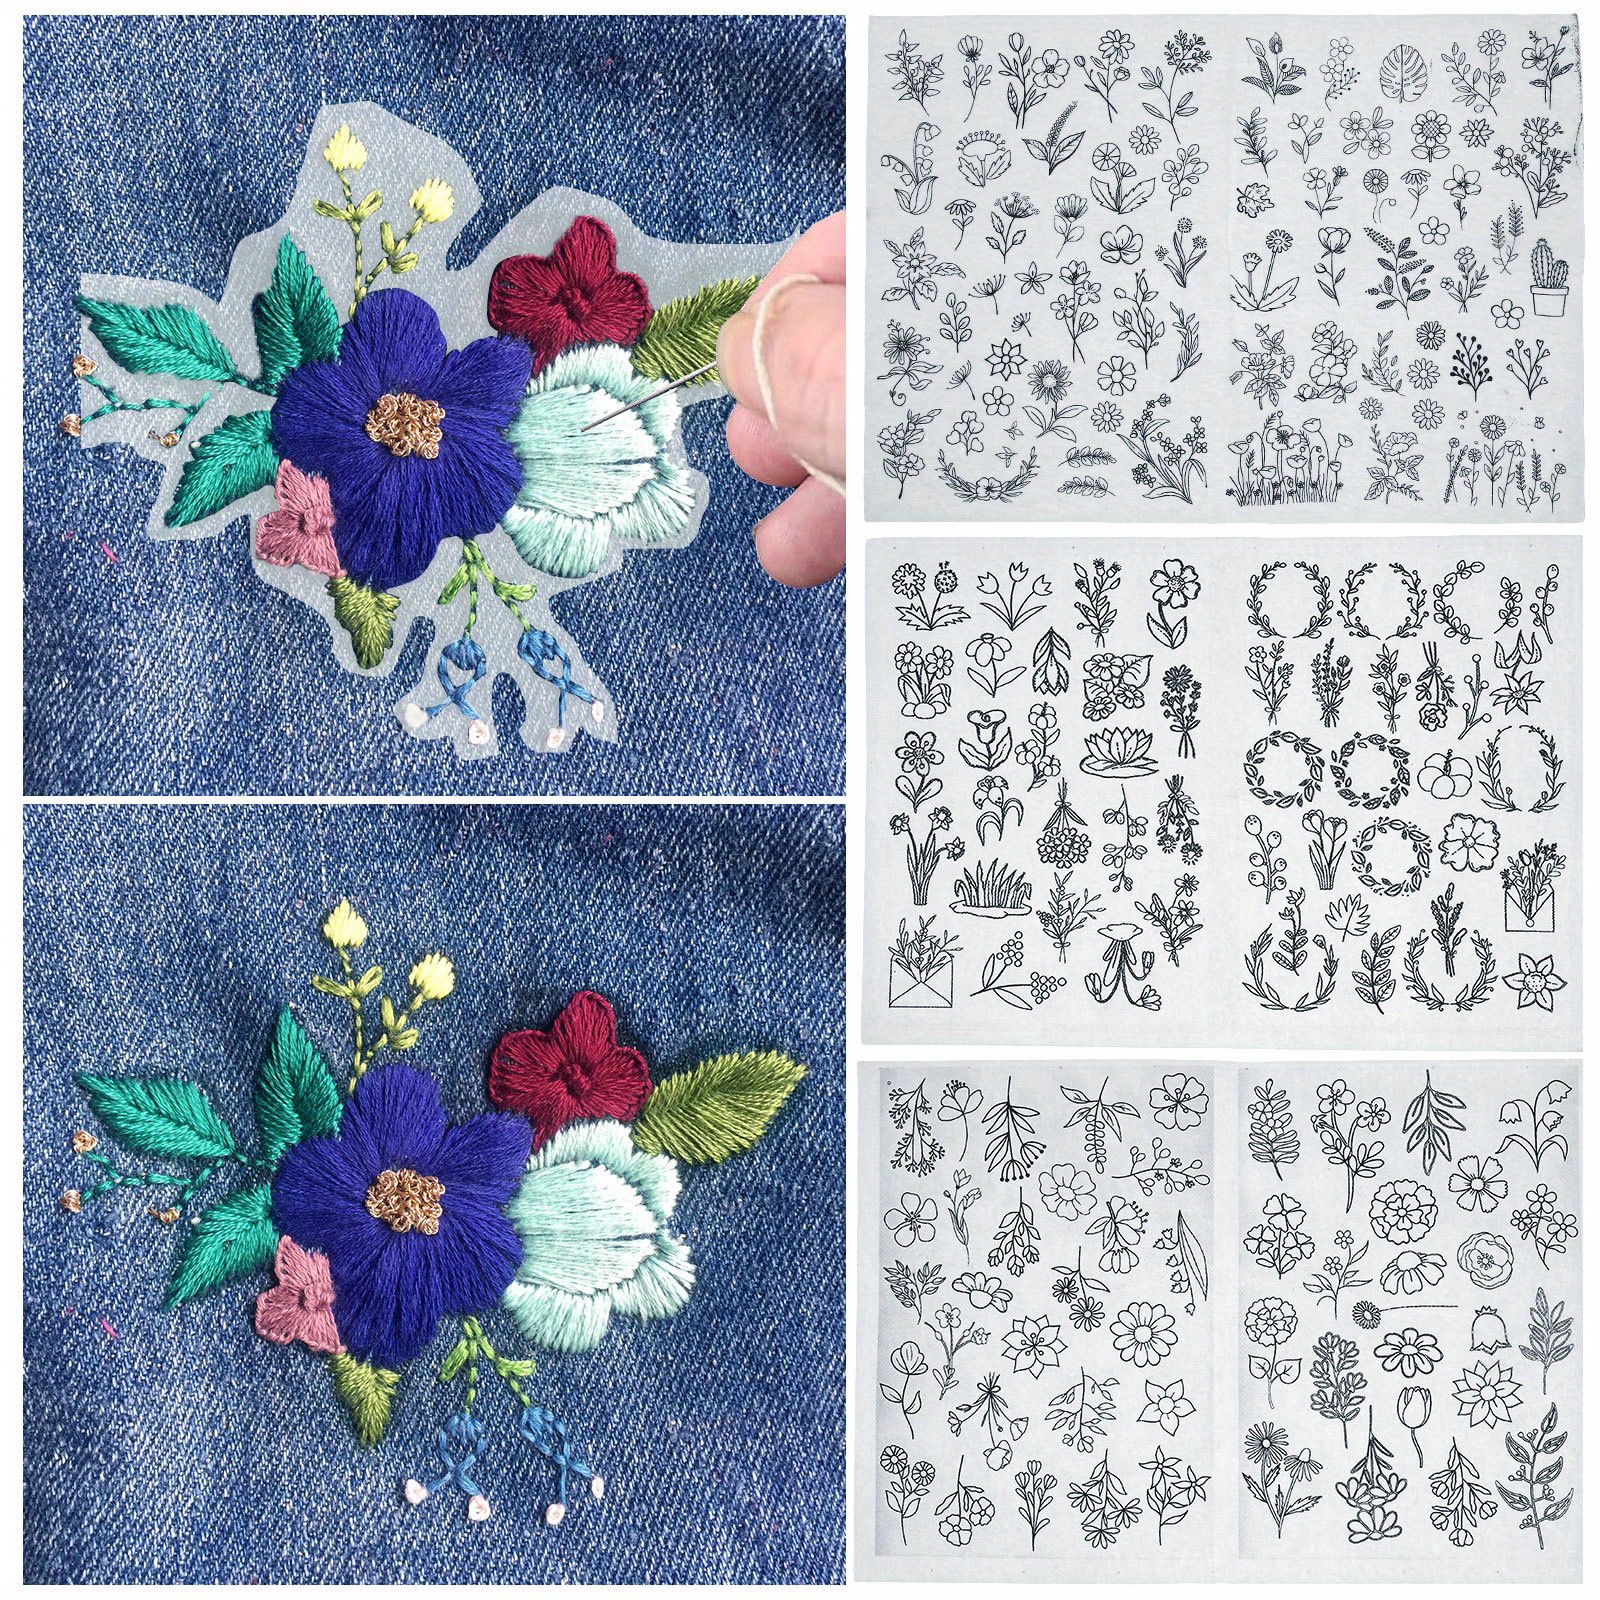 Peel, Stick, and Stitch Hand Embroidery Pattern - Wildflowers